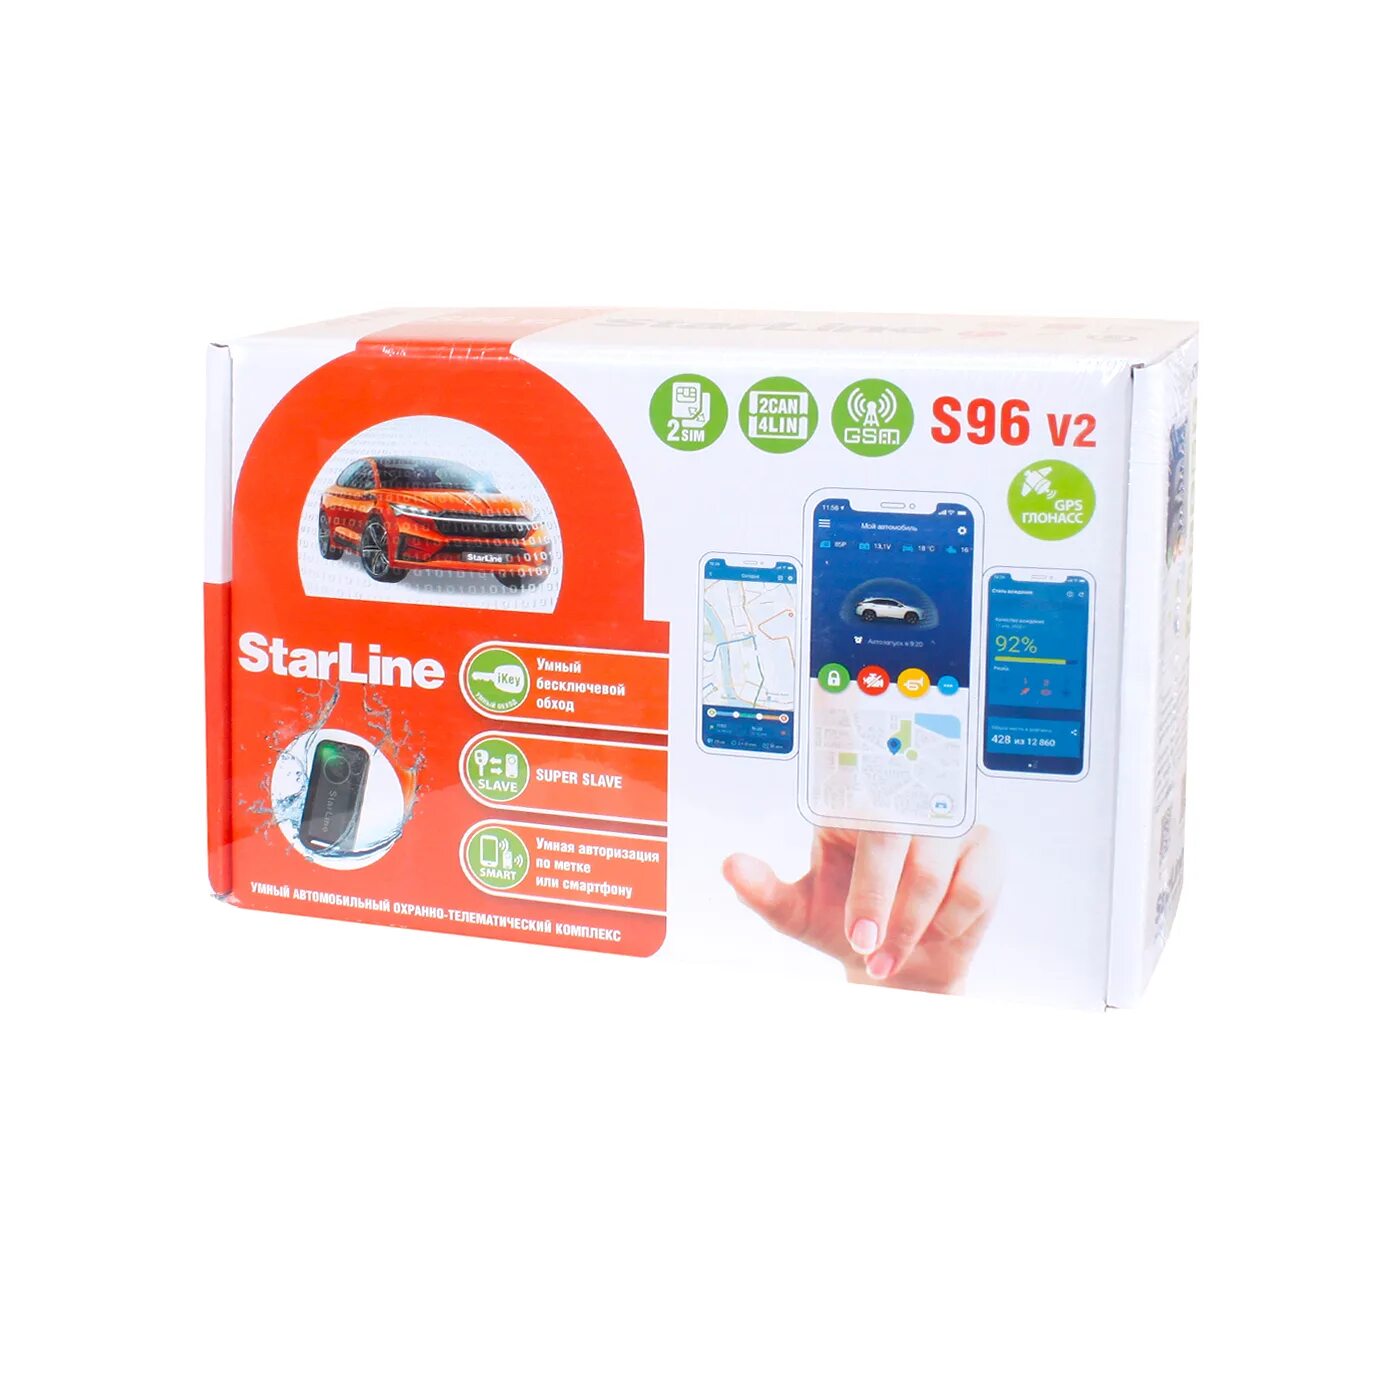 Starline s96 bt gsm 2can 4lin. STARLINE s66 BT 2can+2lin GSM. Сигнализация STARLINE s96 v2 2can+4lin 2sim GSM-GPS. Автосигнализация STARLINE s96 v2 BT GSM GPS (2sim). Автосигнализация STARLINE s96 BT 2can+2lin GSM/GPS+ГЛОНАСС.